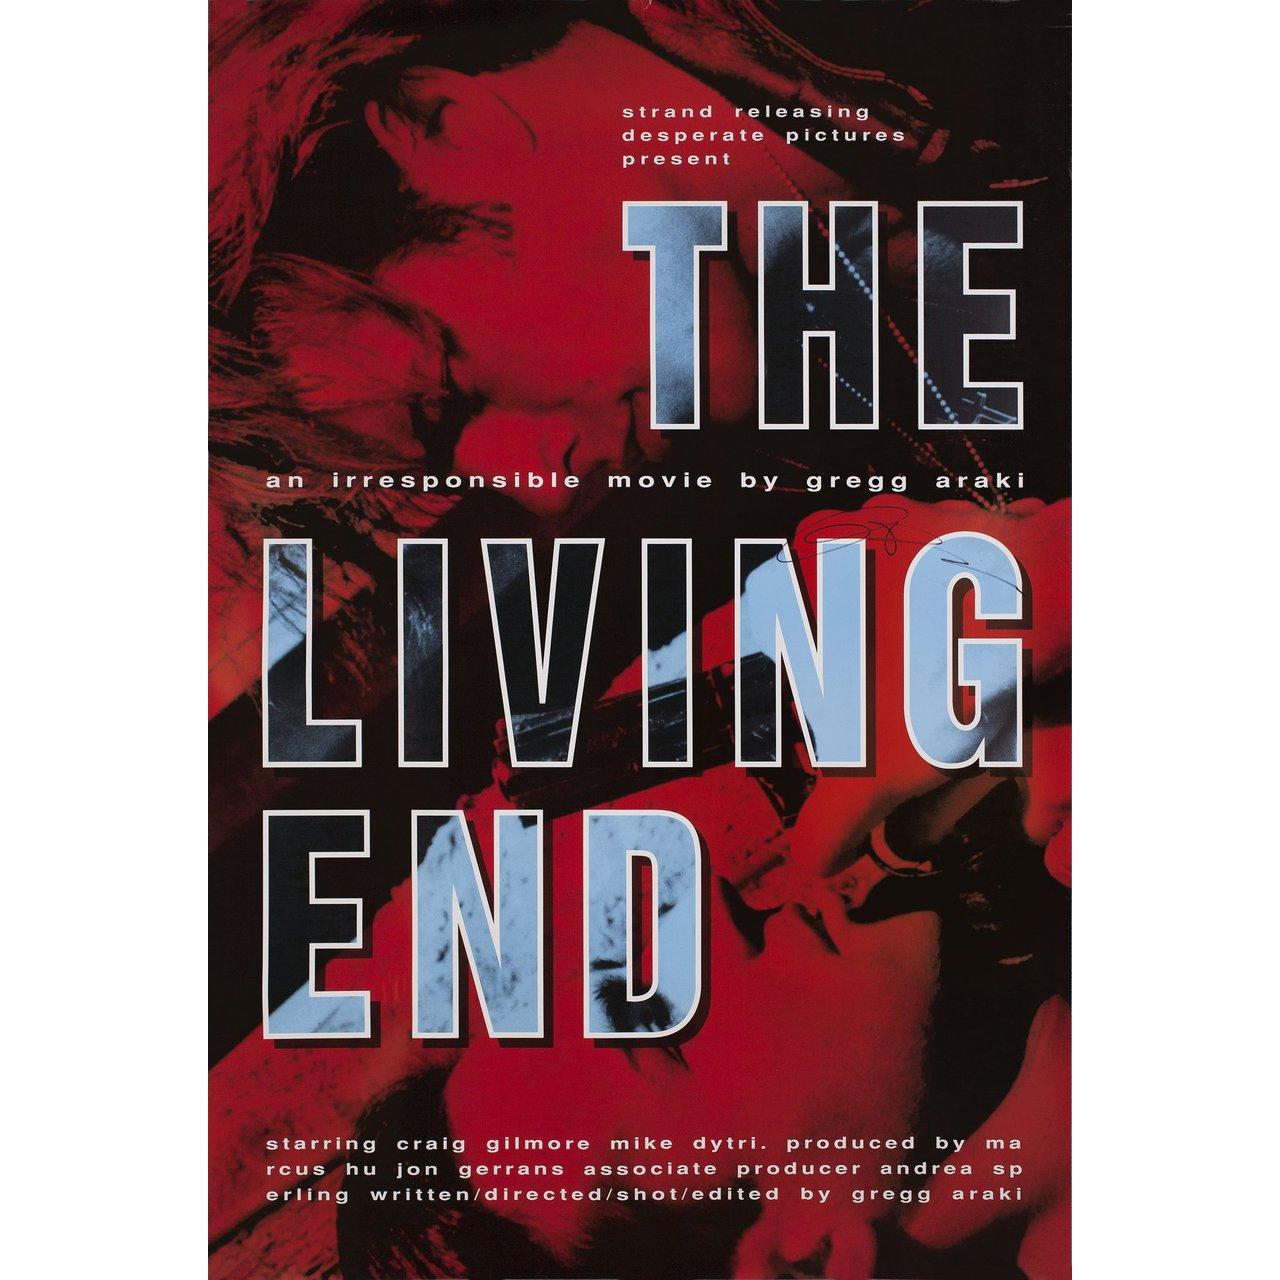 Original 1992 U.S. one sheet poster for the film The Living End directed by Gregg Araki with Mike Dytri / Craig Gilmore / Mark Finch / Mary Woronov. Signed by Gregg Araki. Very Good-Fine condition, rolled. Please note: the size is stated in inches